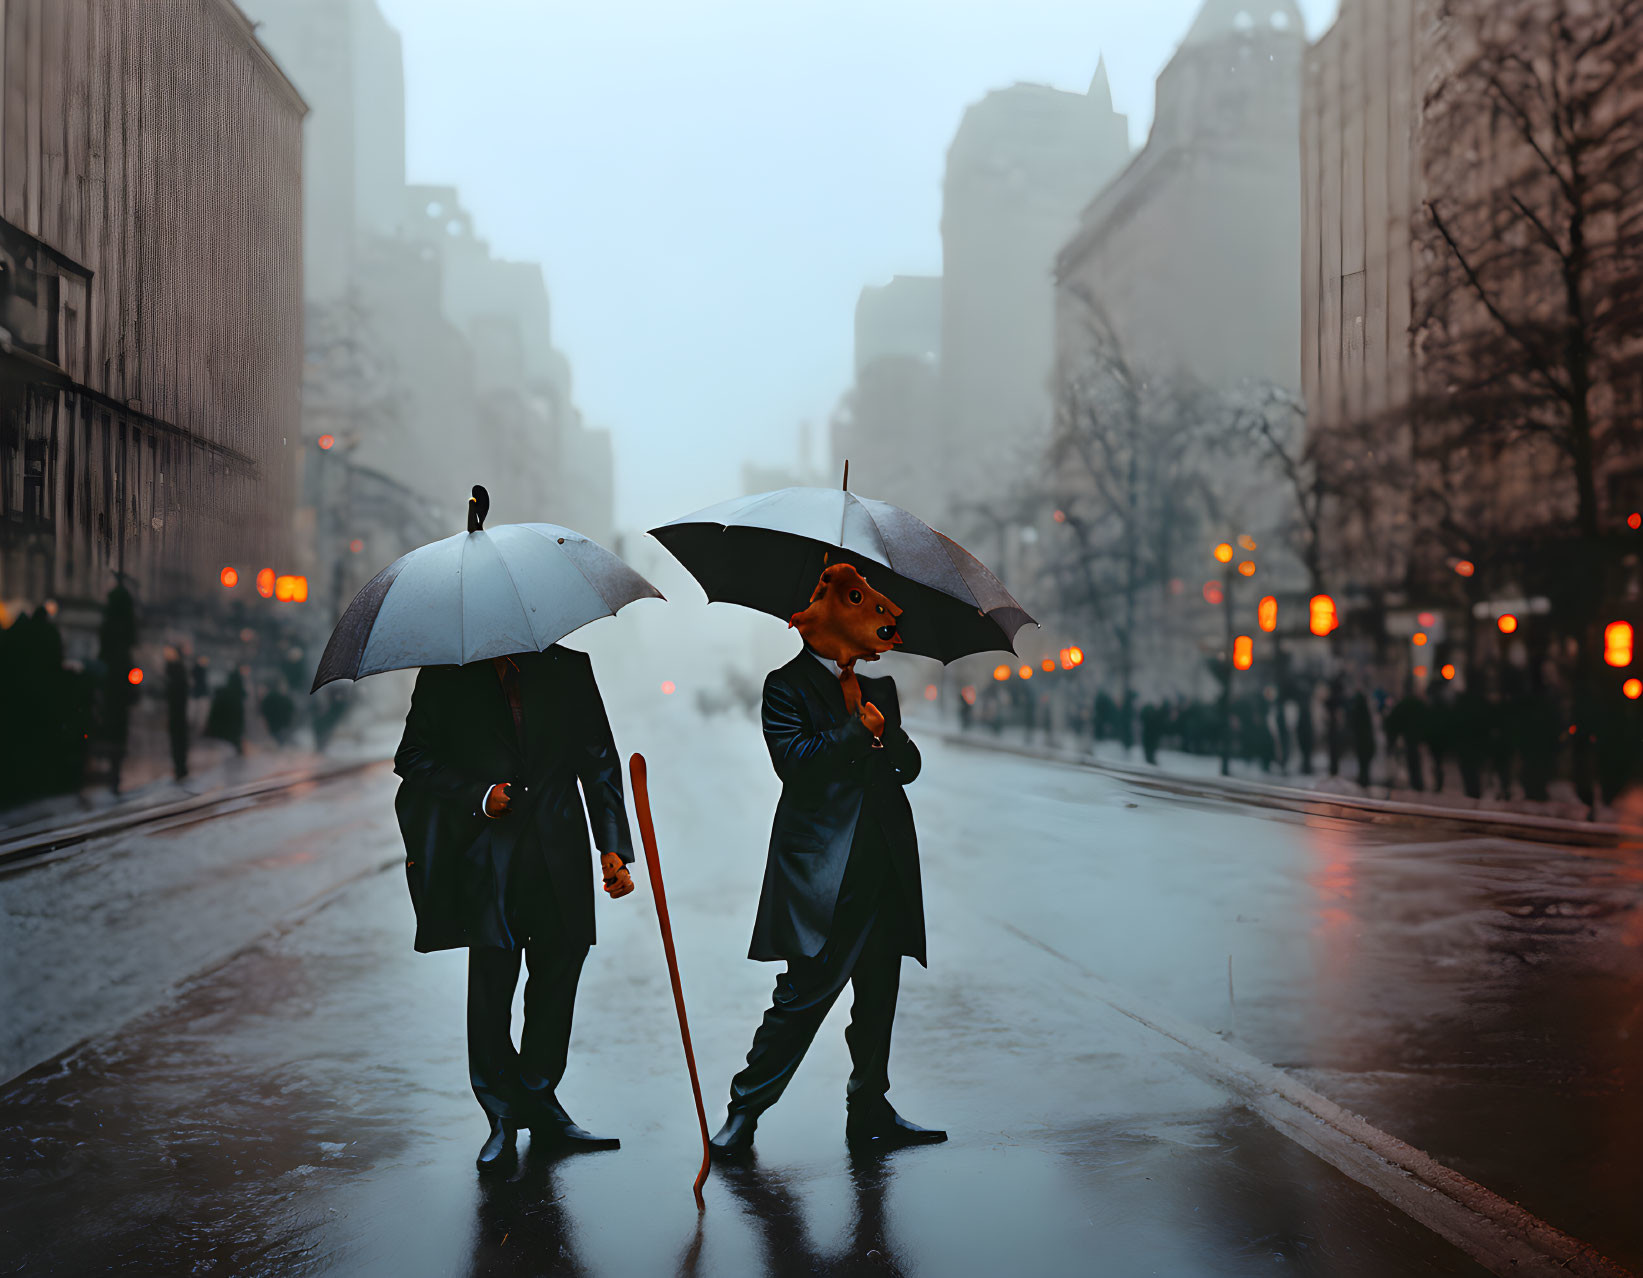 Urban street scene: Two people with umbrellas in foggy city ambiance